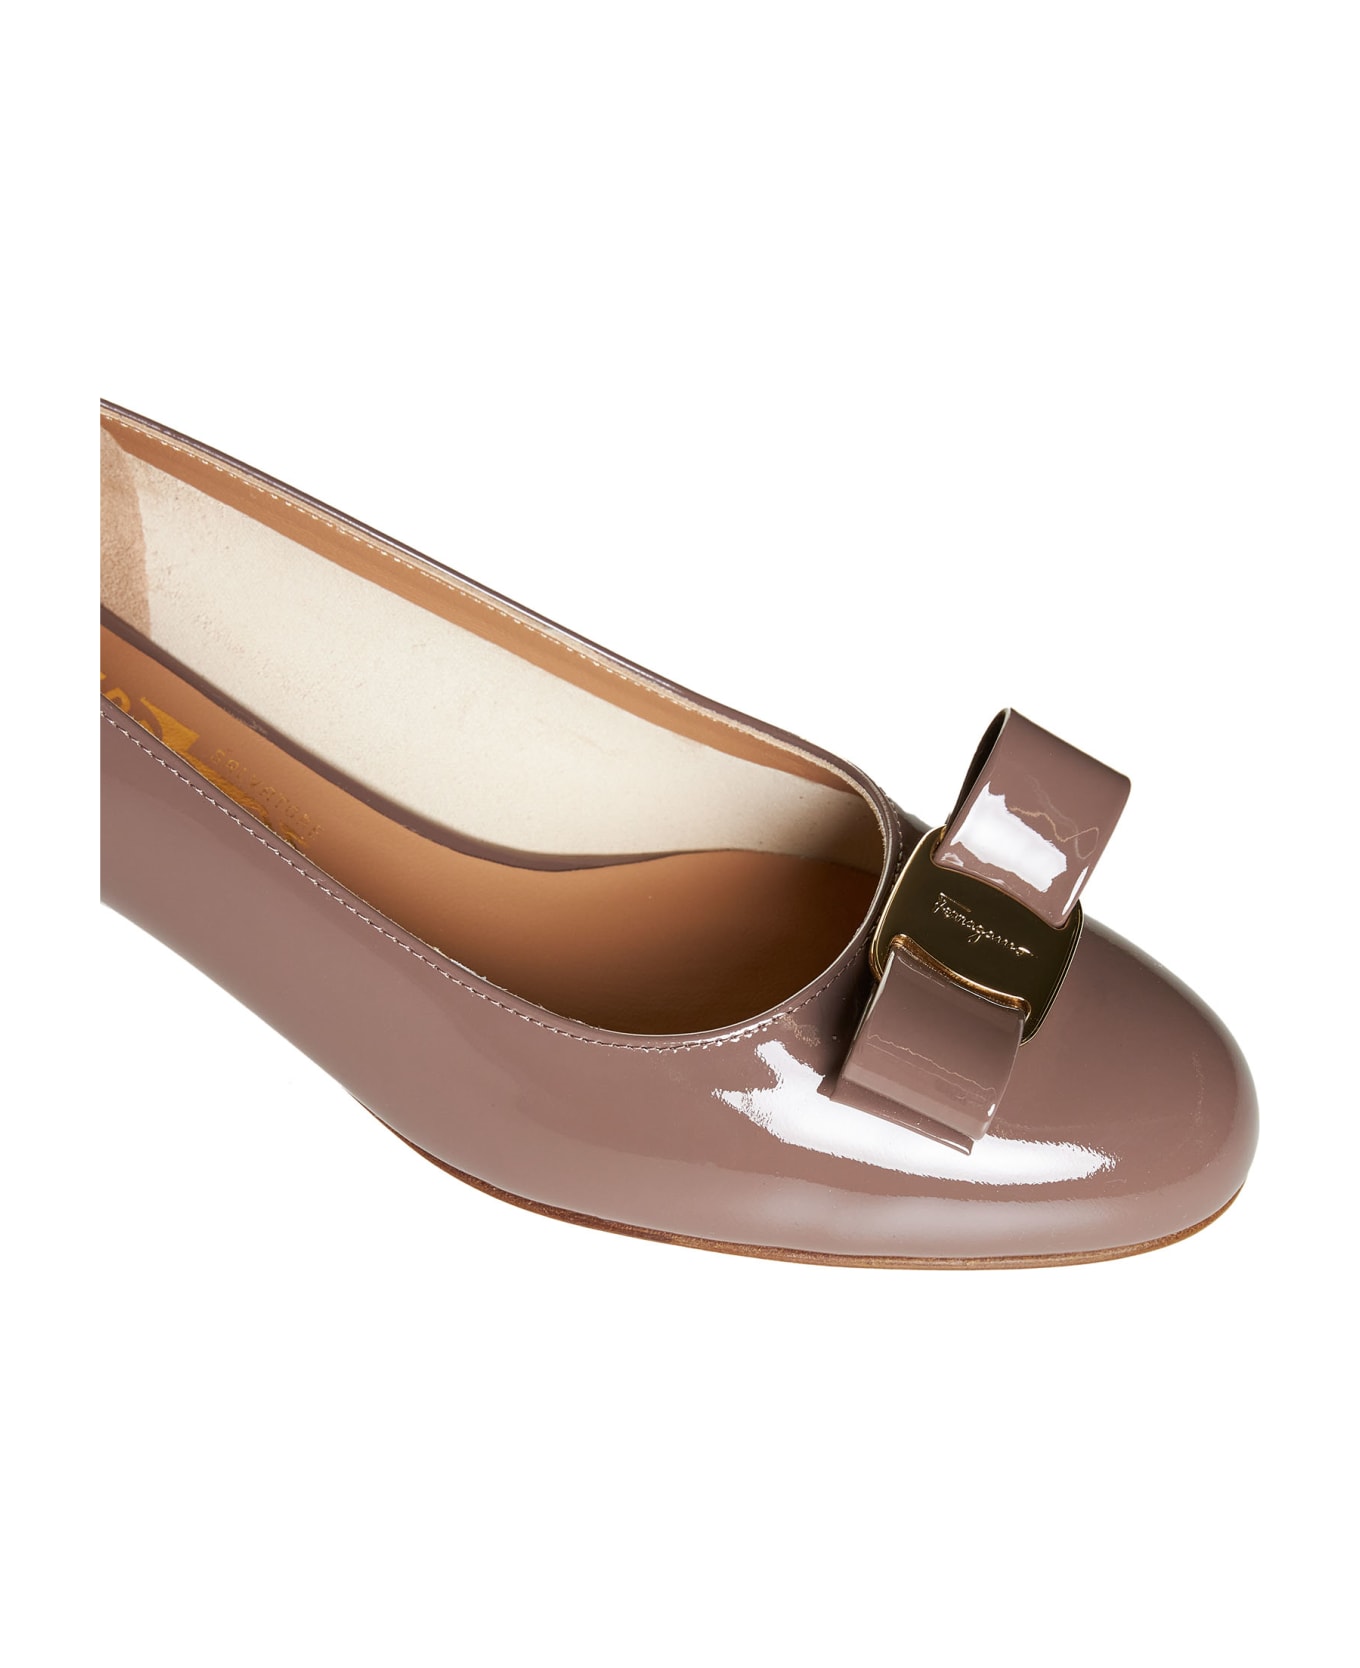 Ferragamo Bow-detailed Slip-on Pumps - Caraway seed ハイヒール